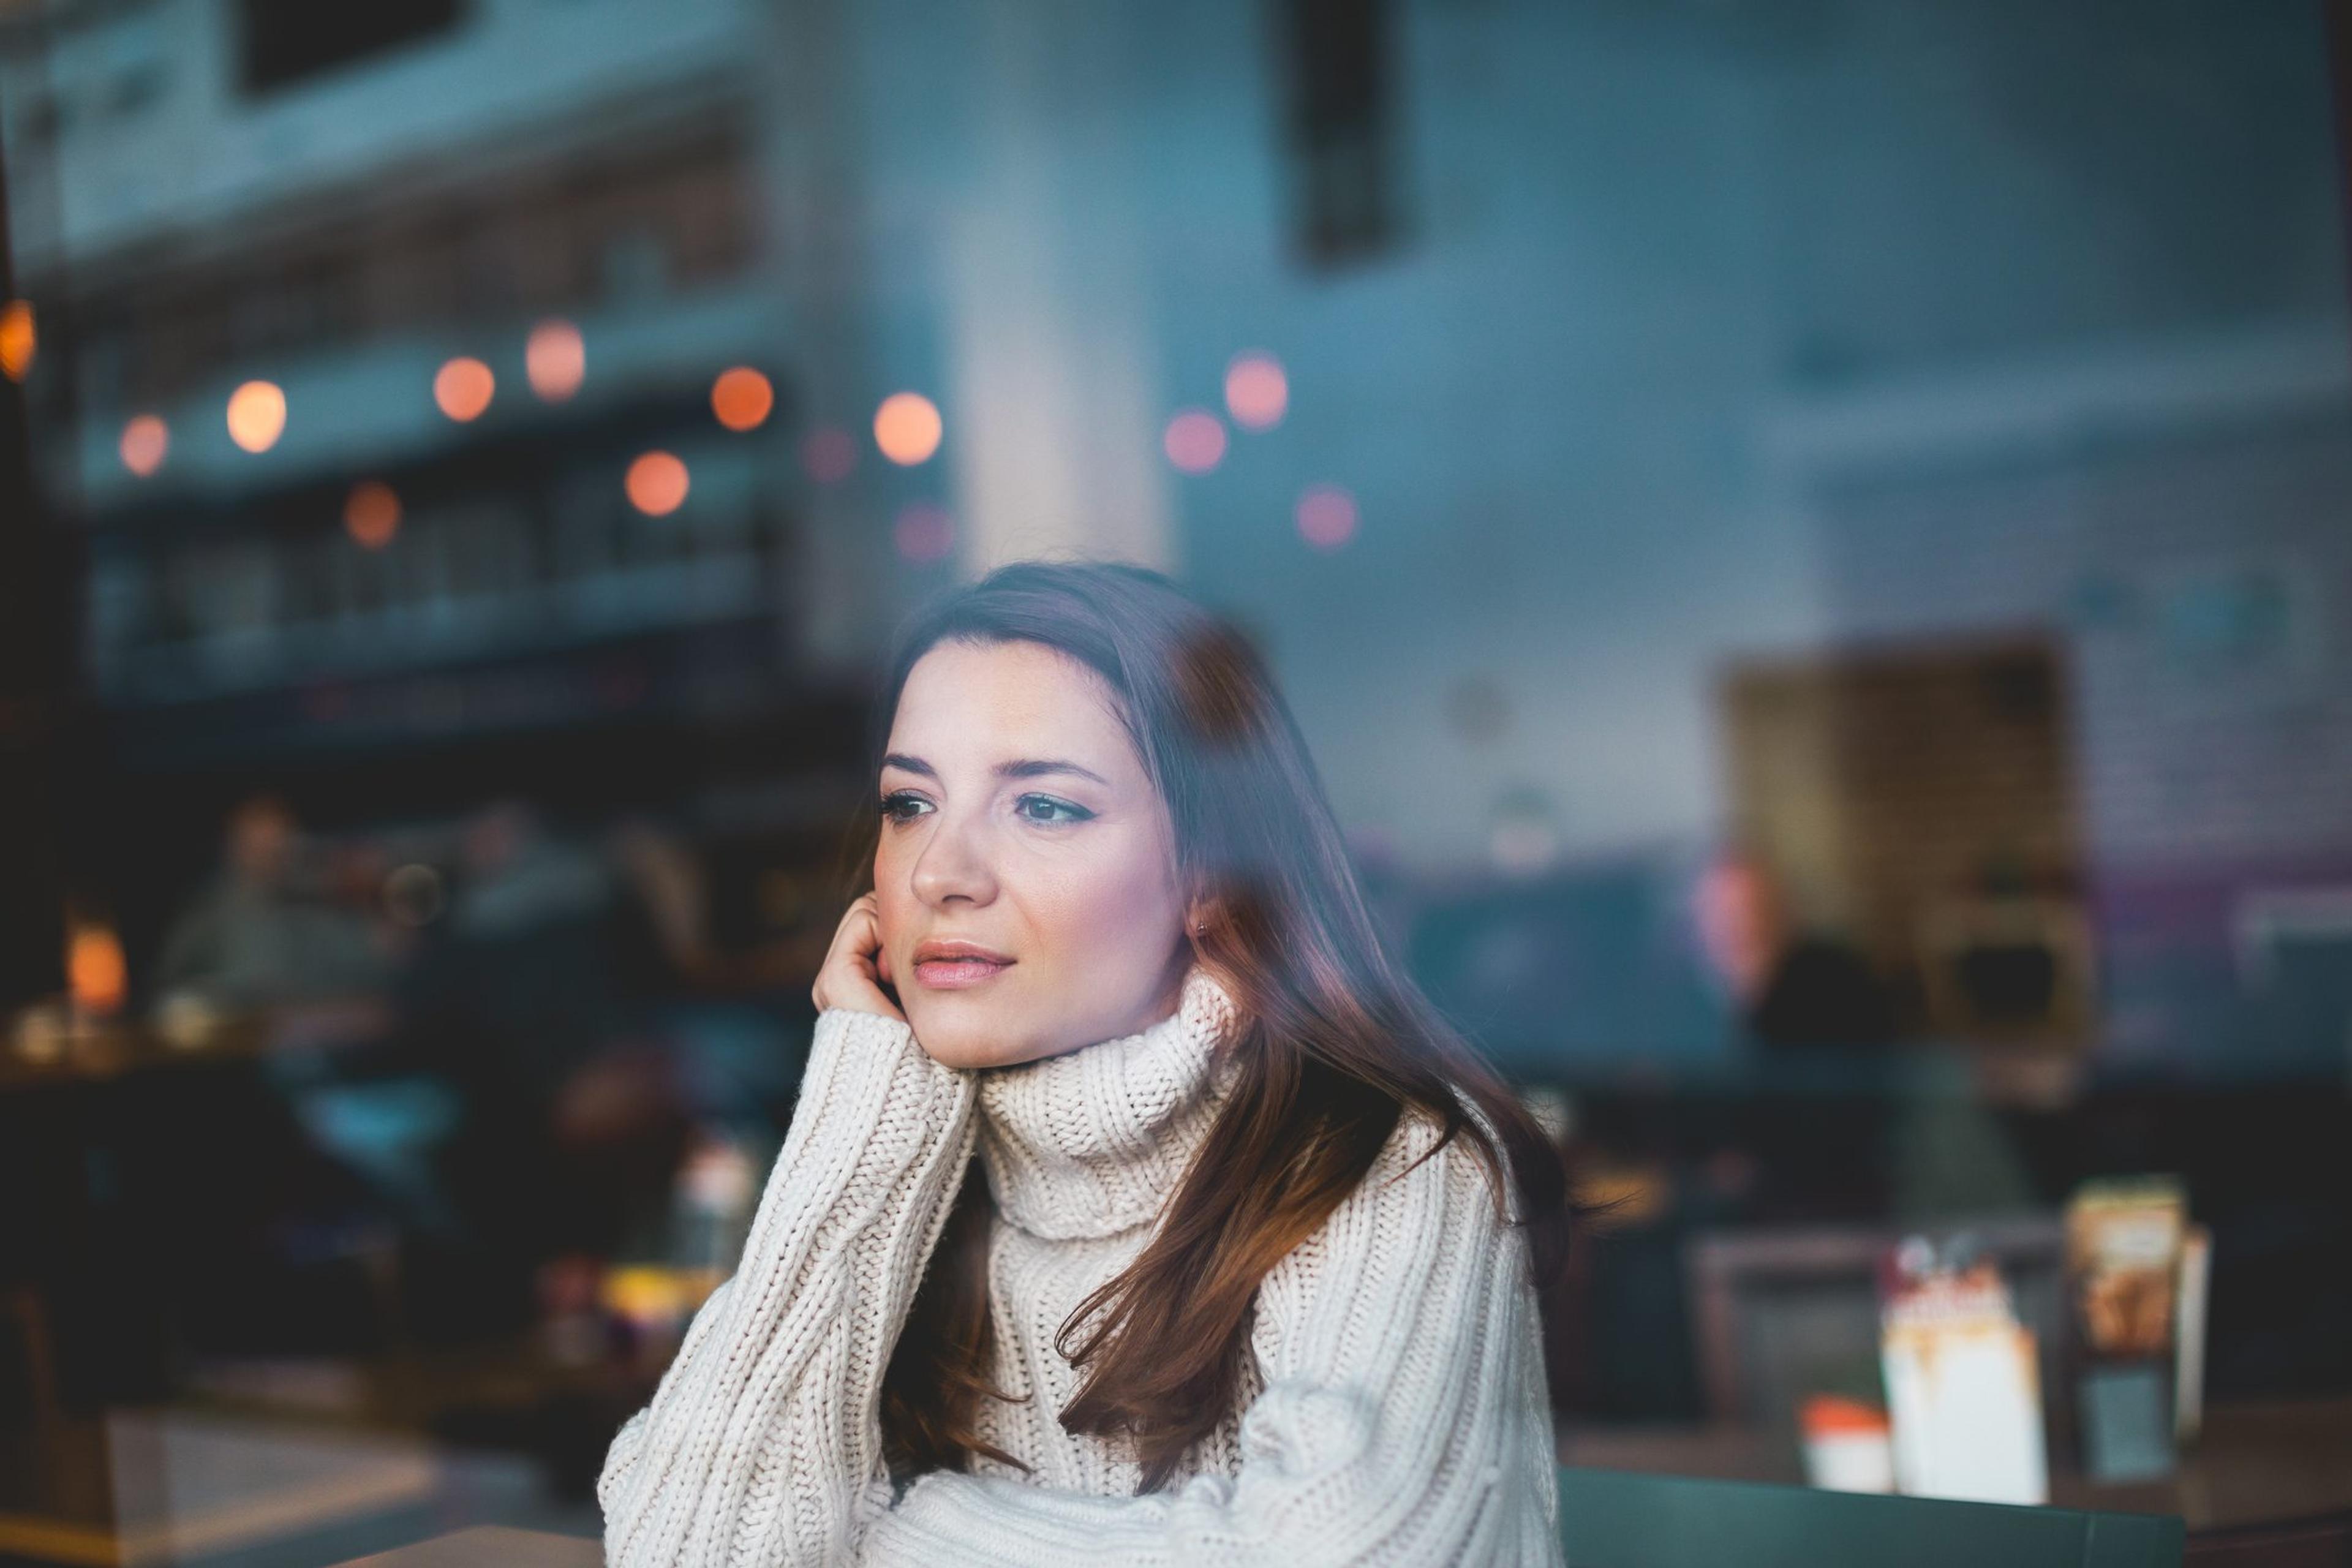 Woman sits alone in a cafe looking out the windows feeling the holiday blues